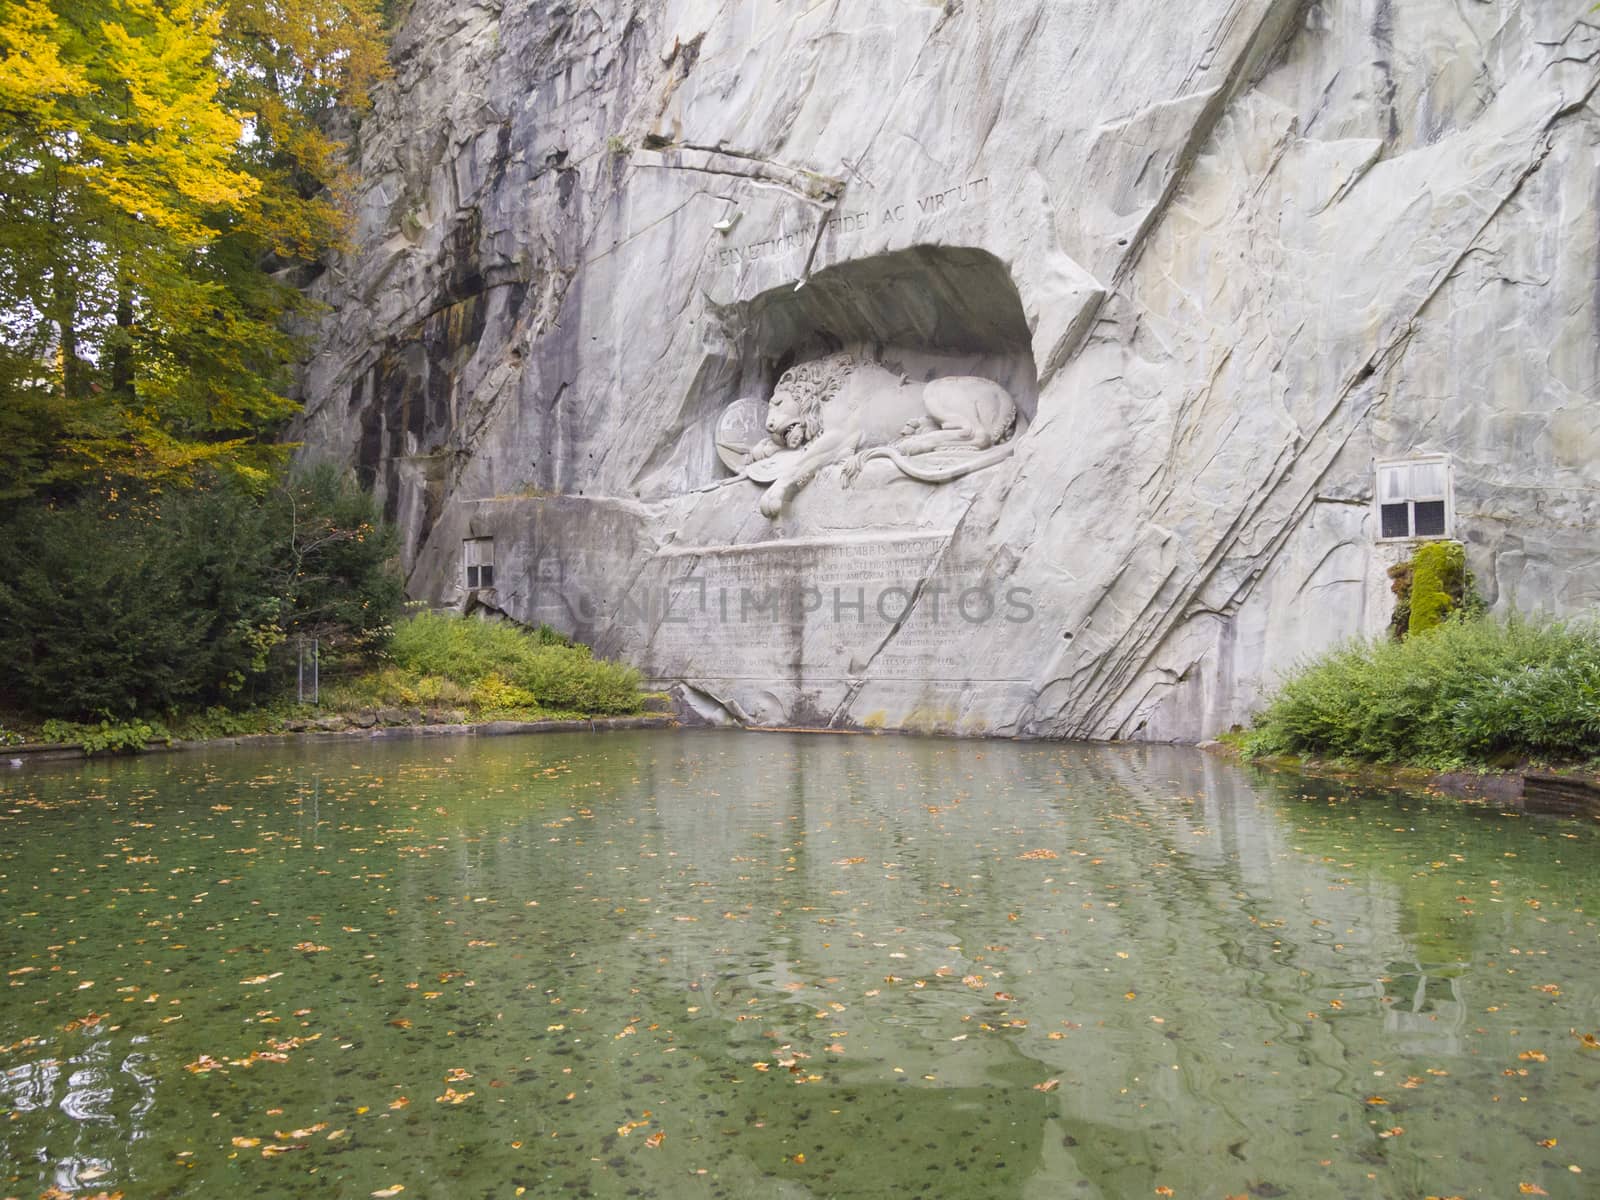 The Dying Lion Monument or the Lion of Lucerne. A historic landmark sculpture in Lucerne, Switzerland that commemorates the Swiss Guards who were massacred in 1792 during the French Revolution.